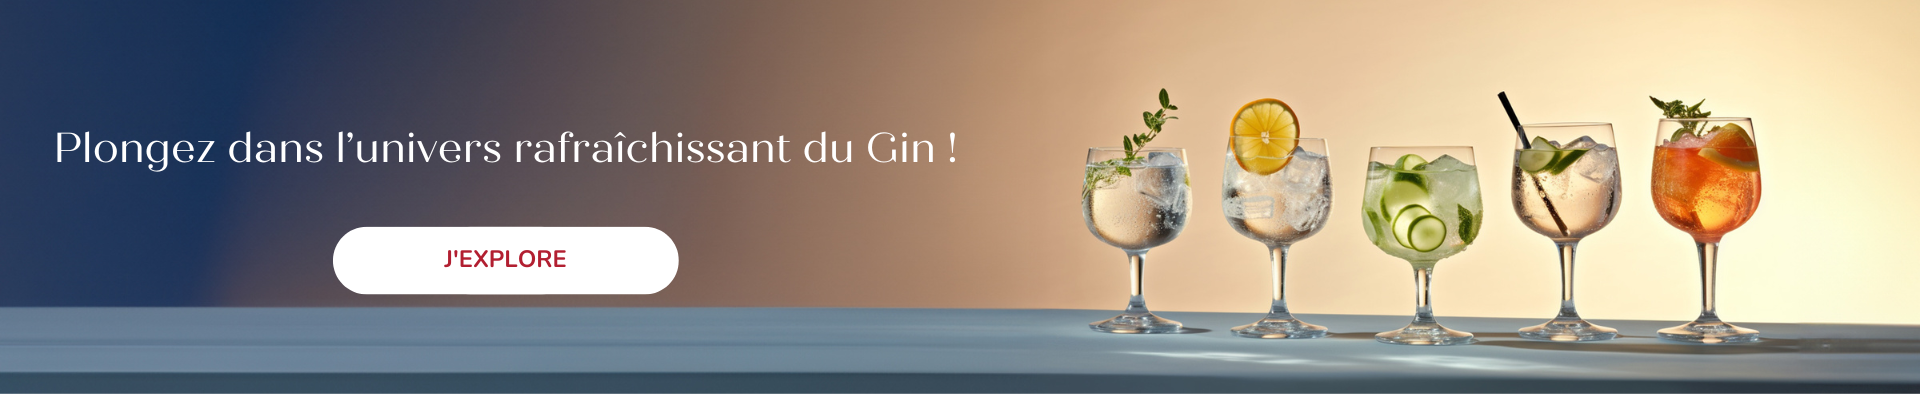 Les Gins